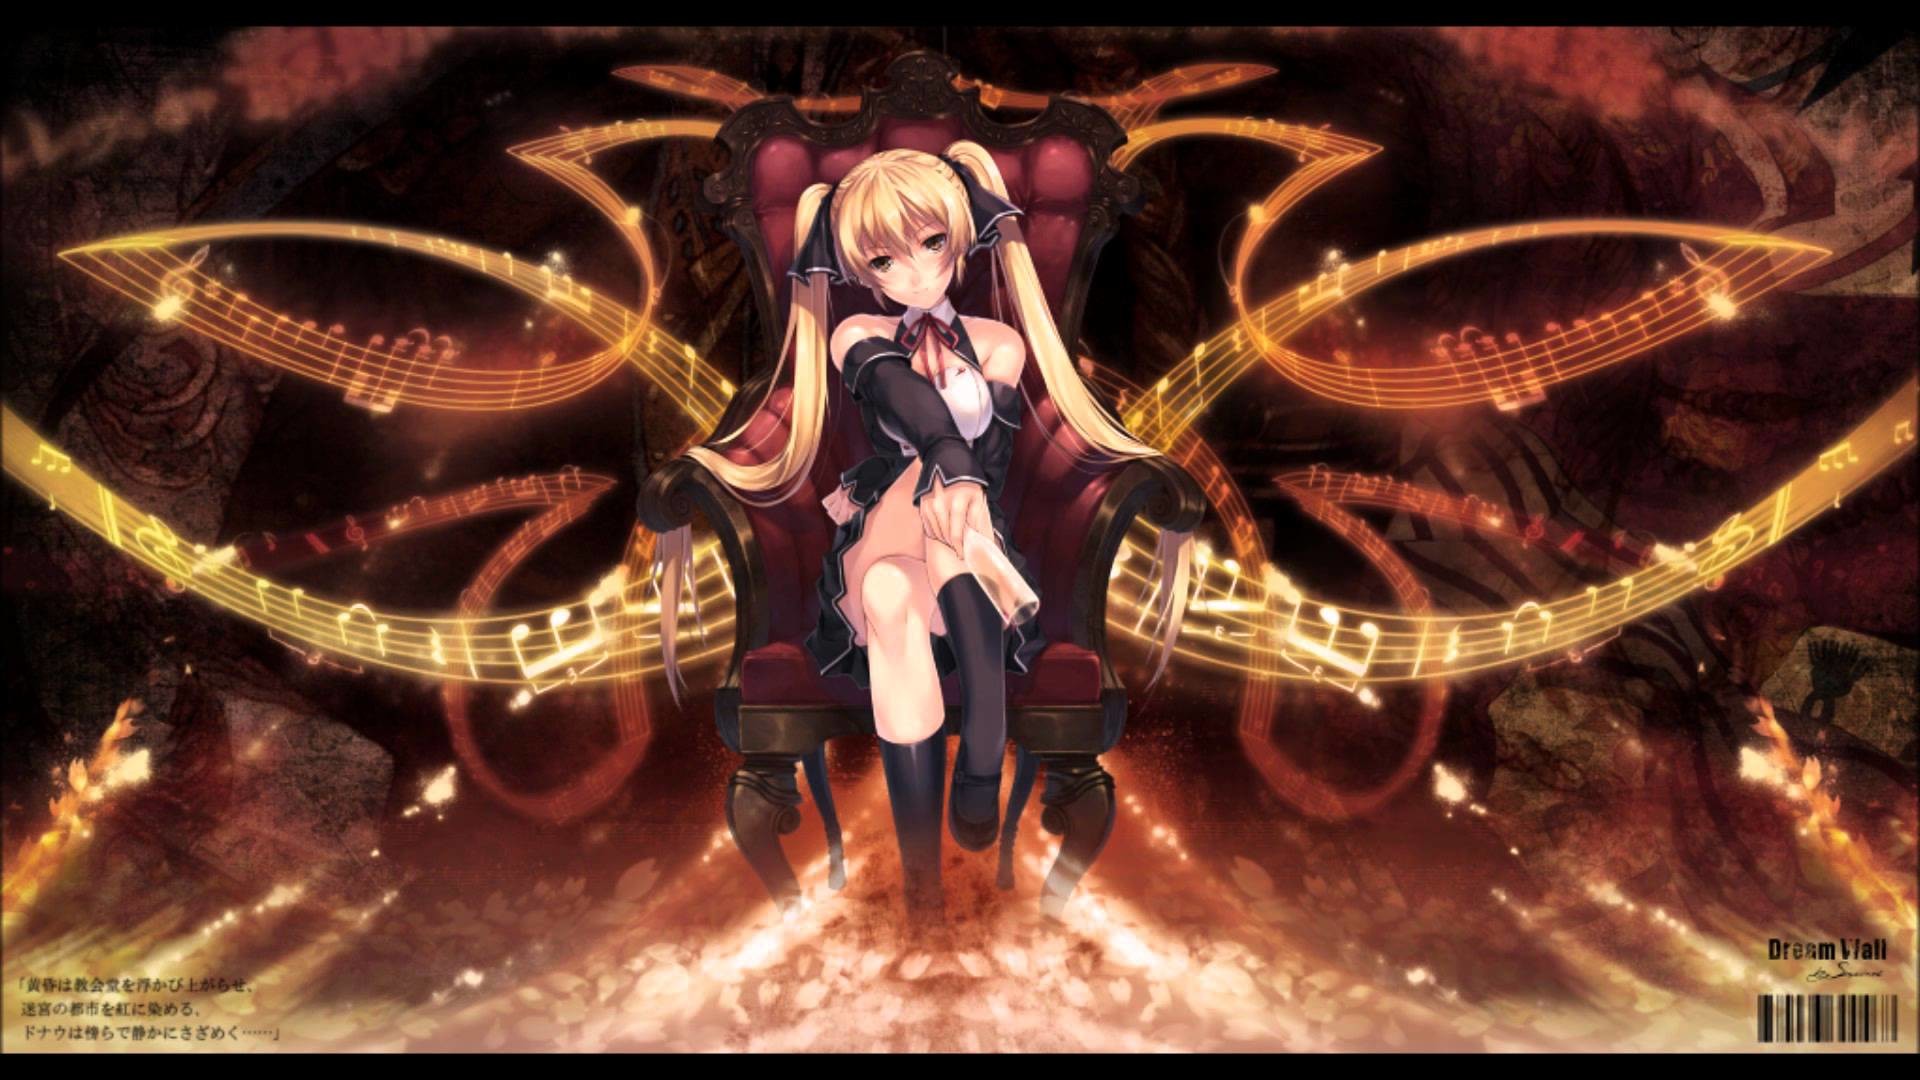 Epic/battle Anime Ost No*15 - Anime Girl With Music Notes - 1920x1080  Wallpaper 